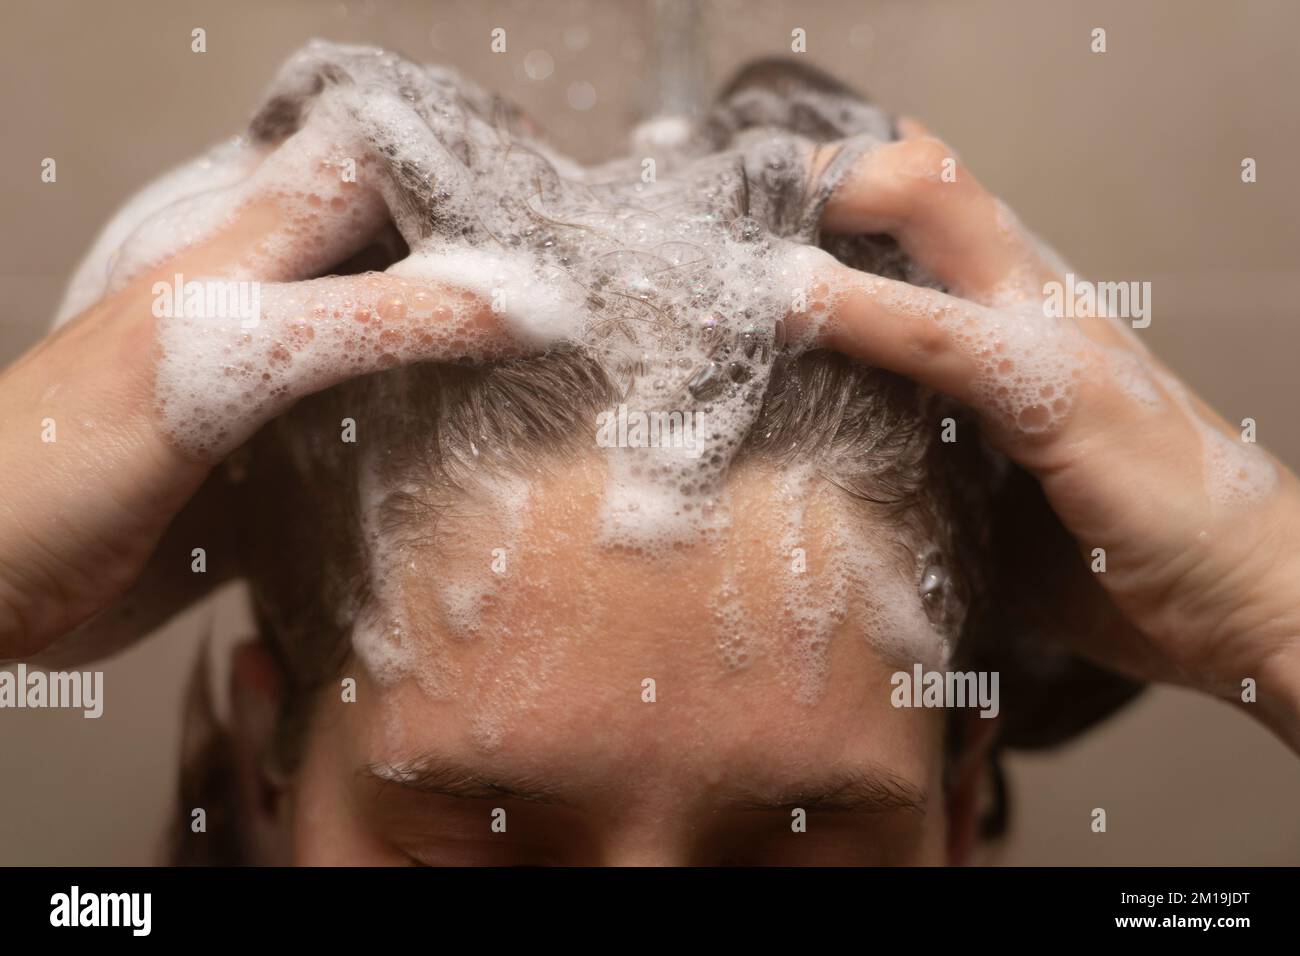 Closeup of a woman in her thirties washing her hair in the shower and rubbing shampoo suds into her hair Stock Photo